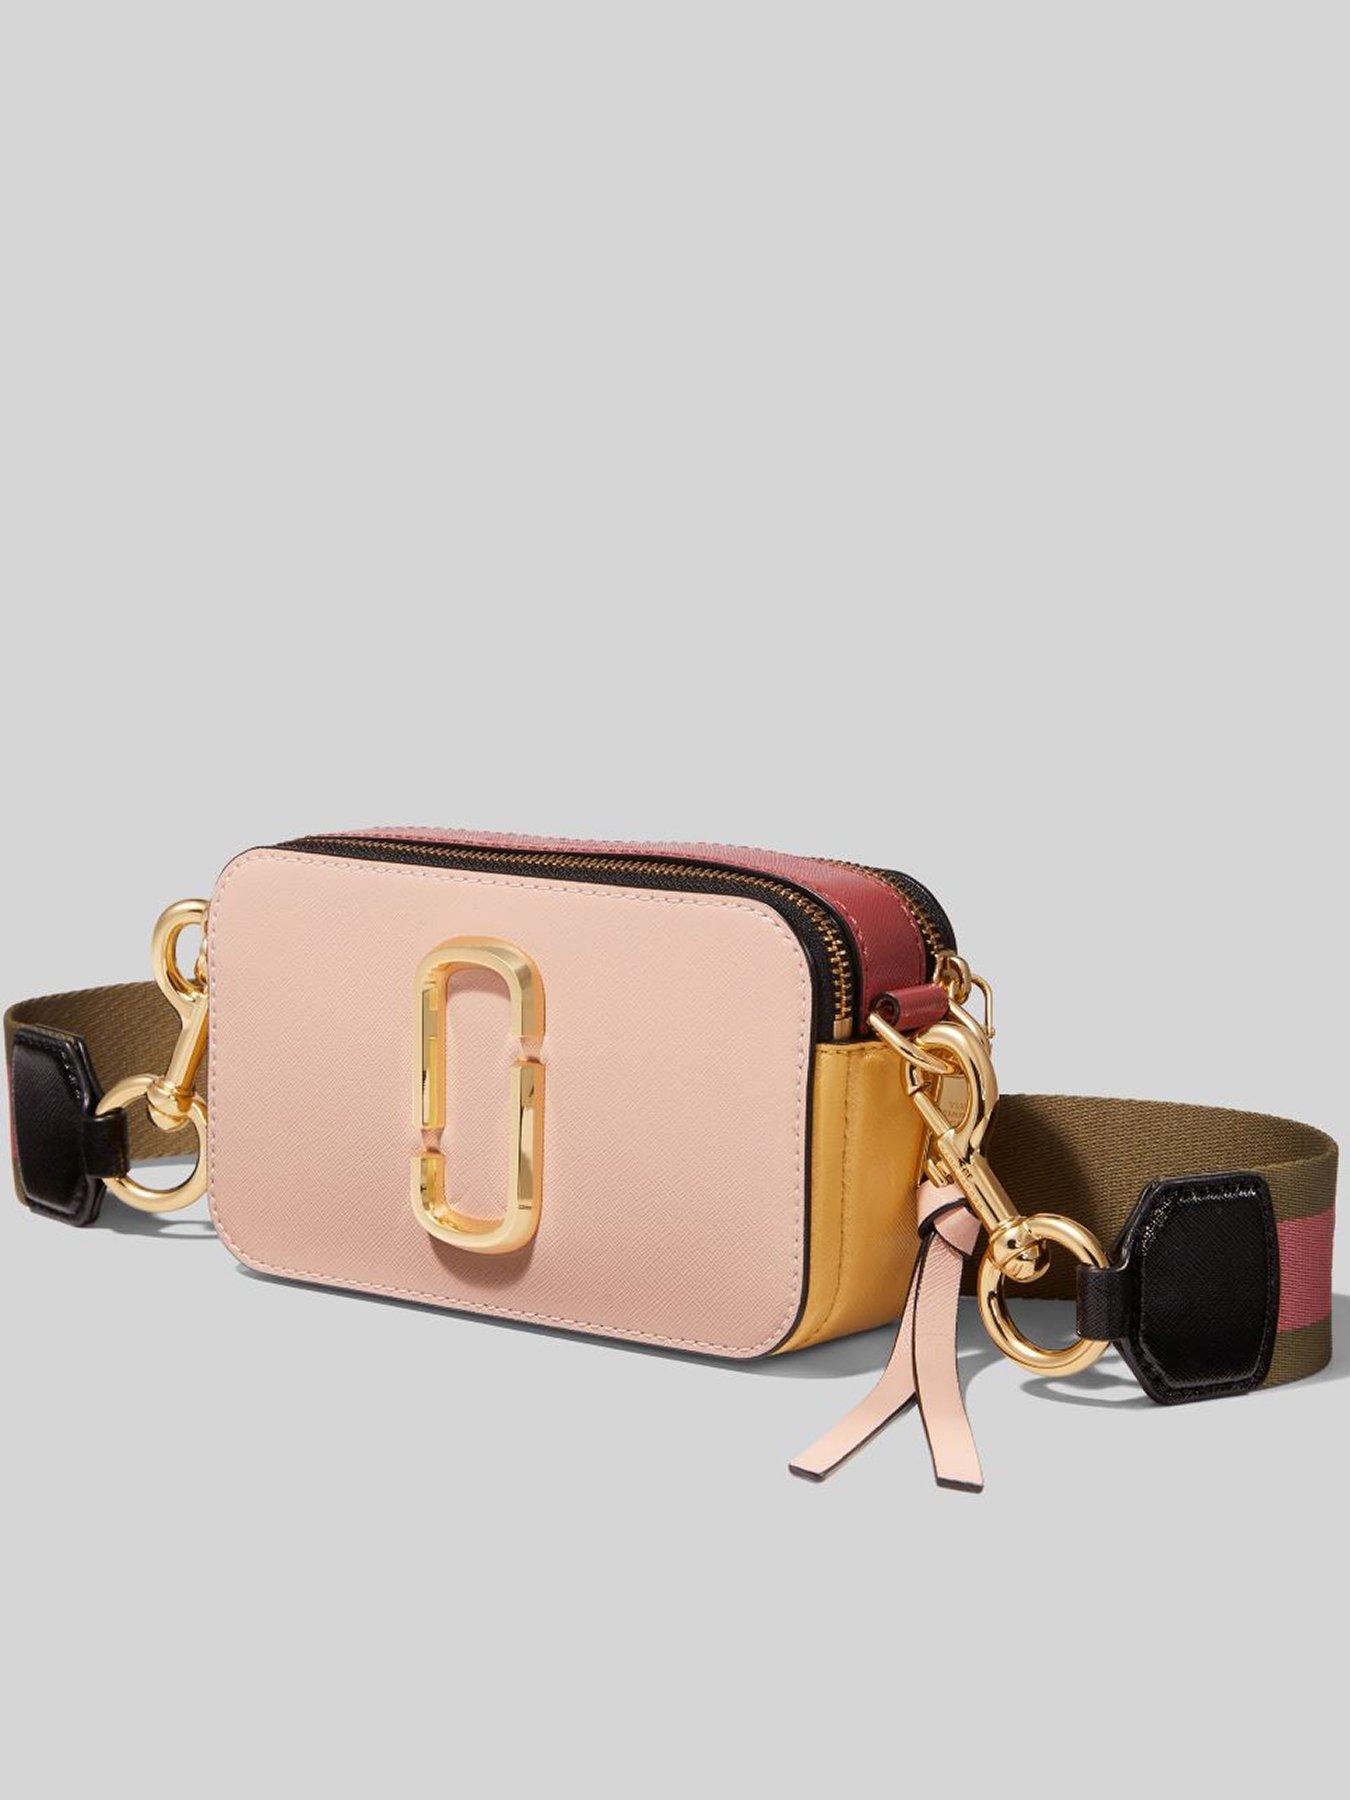 Pin by Fany Zamudio on Bag love  Marc jacobs snapshot bag, Girly